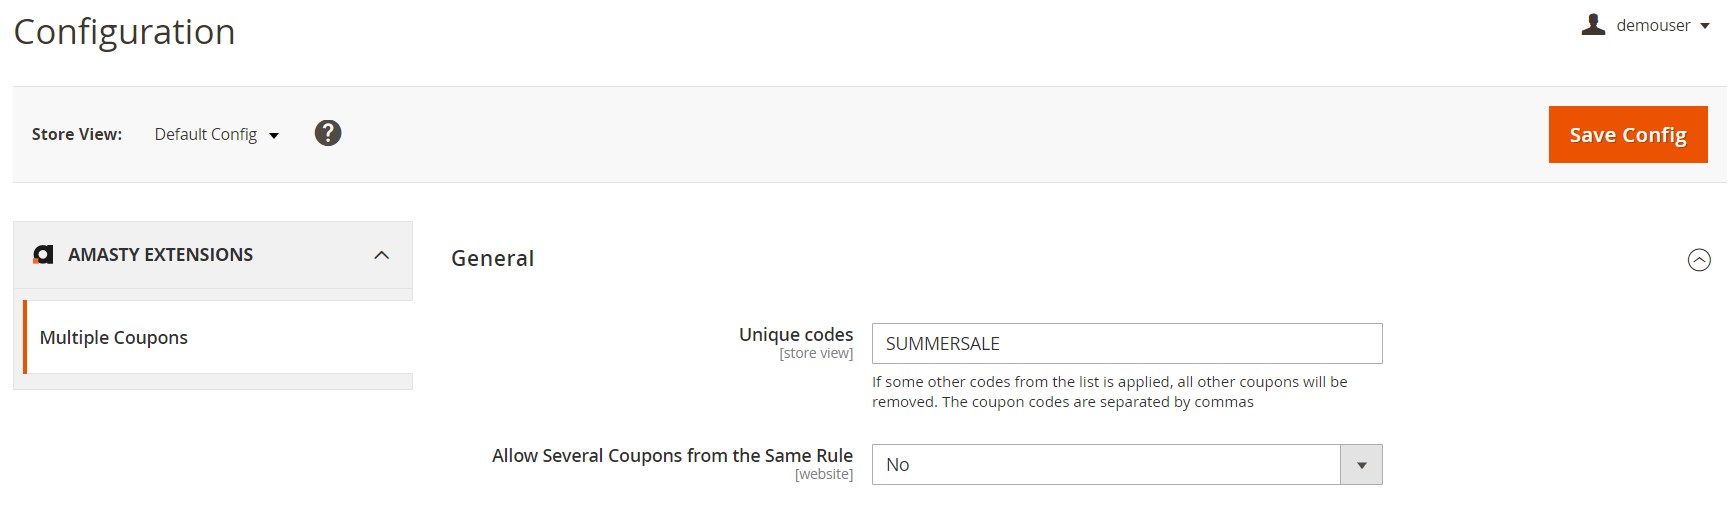 Amasty Multiple Coupons Magento 2 extension configuration